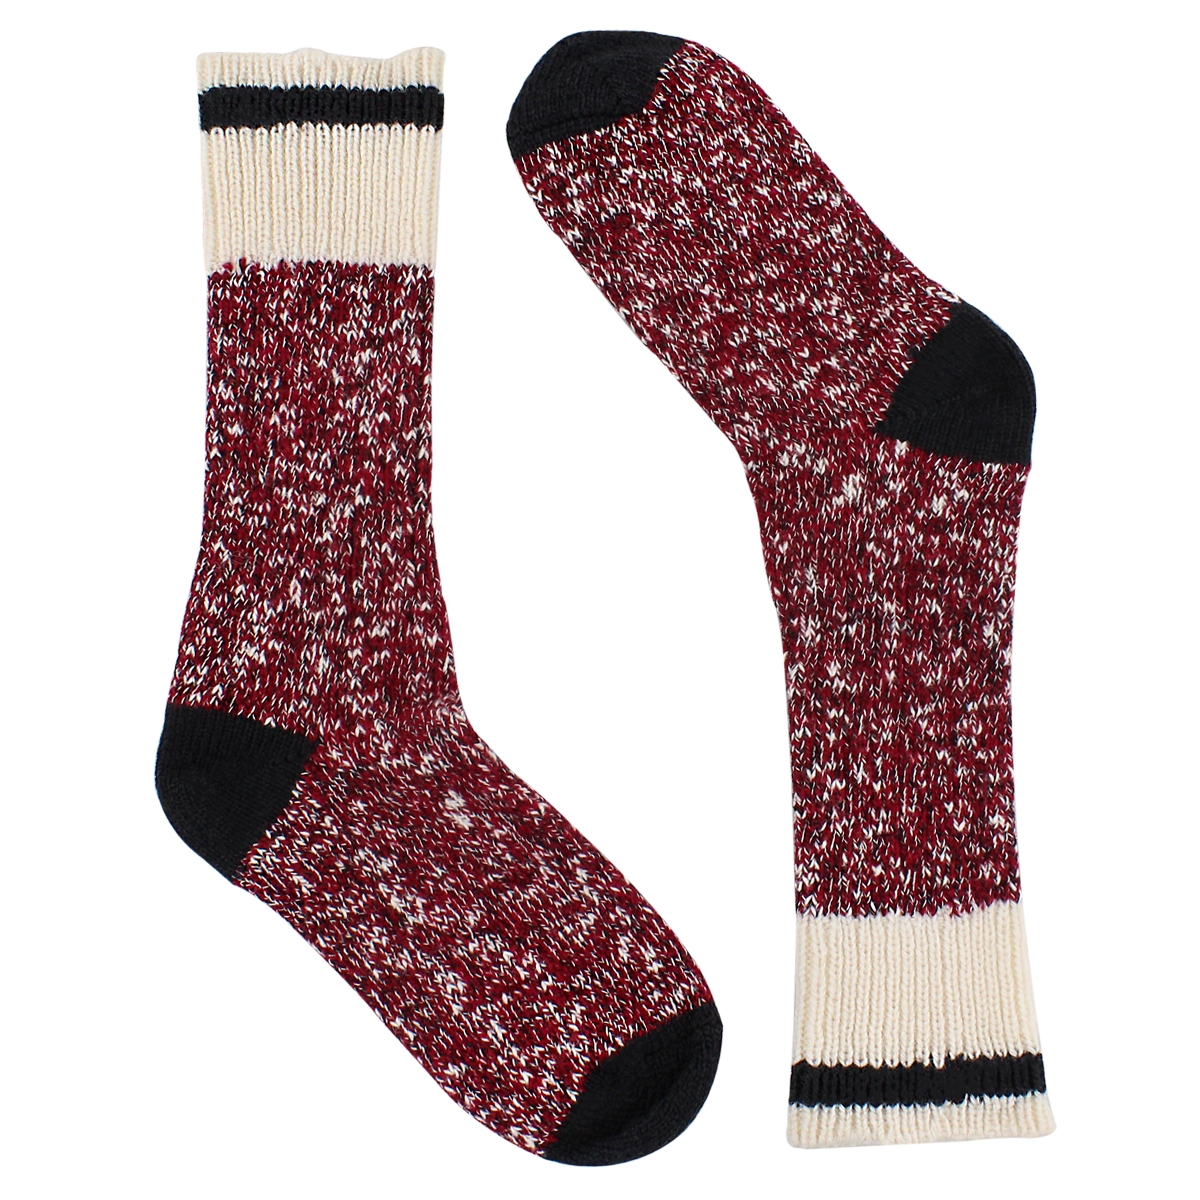 Women's Duray Work Sock - Red Marled